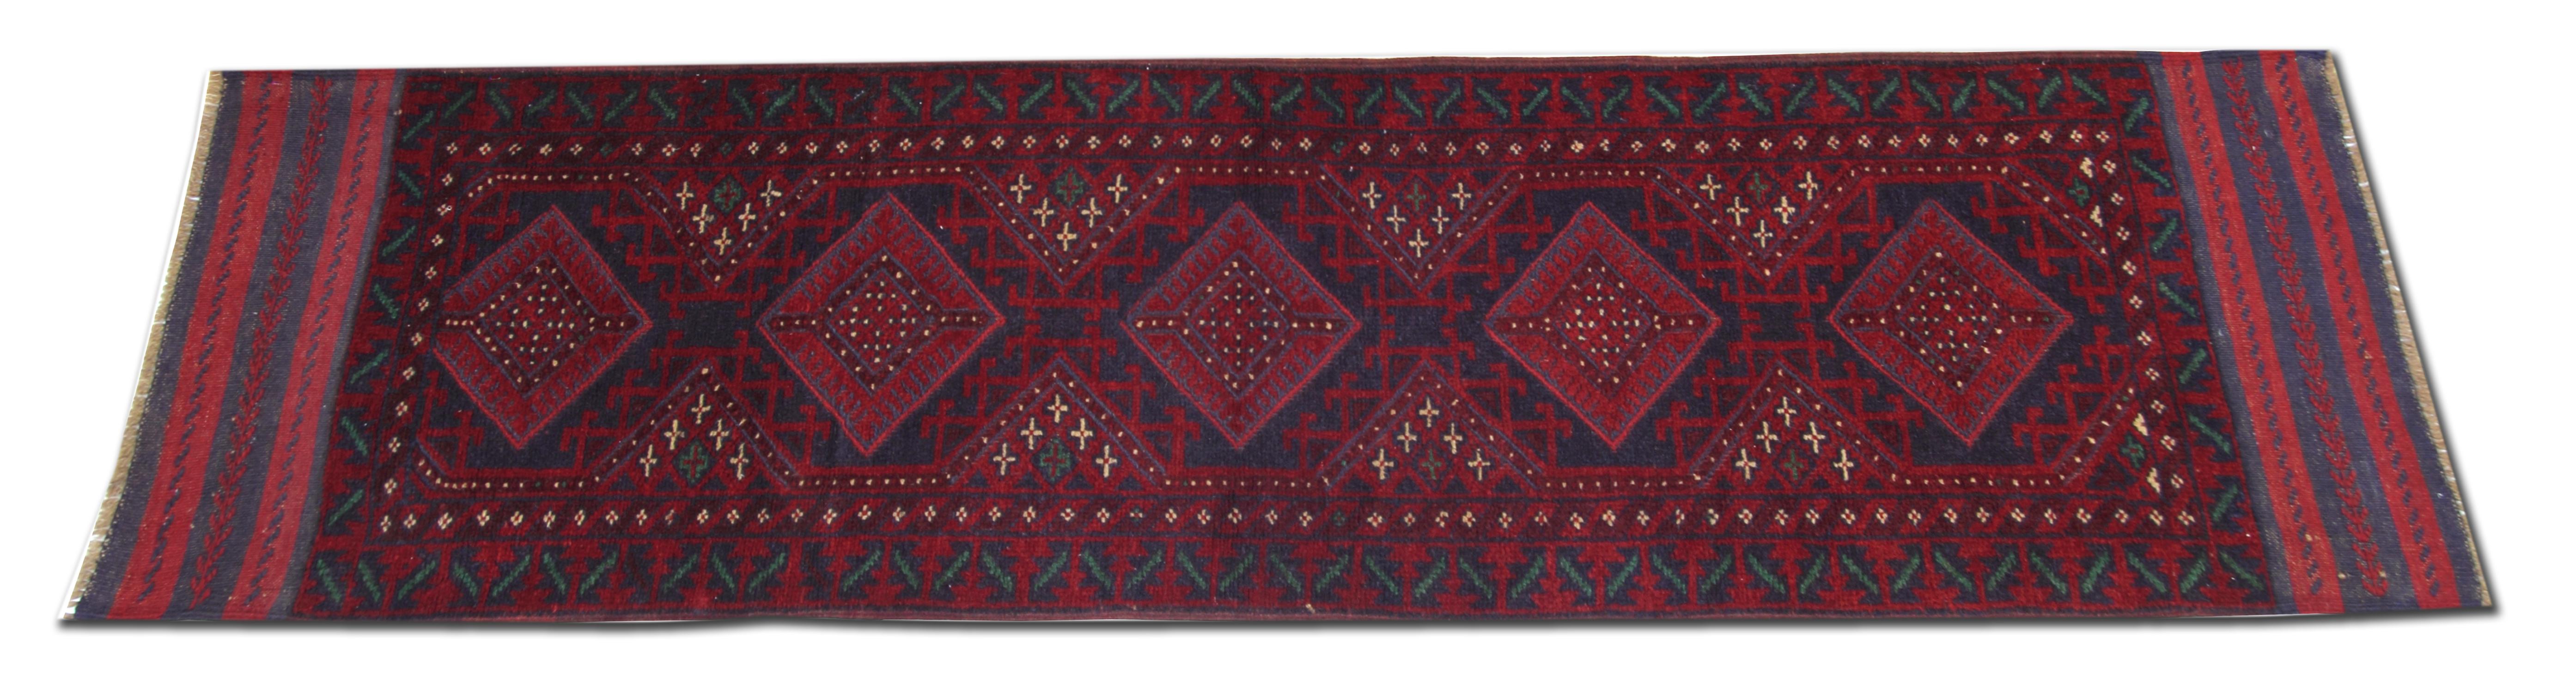 This impressive antique red rug is made from our master weavers in Afghanistan. These particular handmade carpet runners are made with all-natural vegetable dyes. The patterned rugs display an all-over geometrical rug pattern. This woven rug also